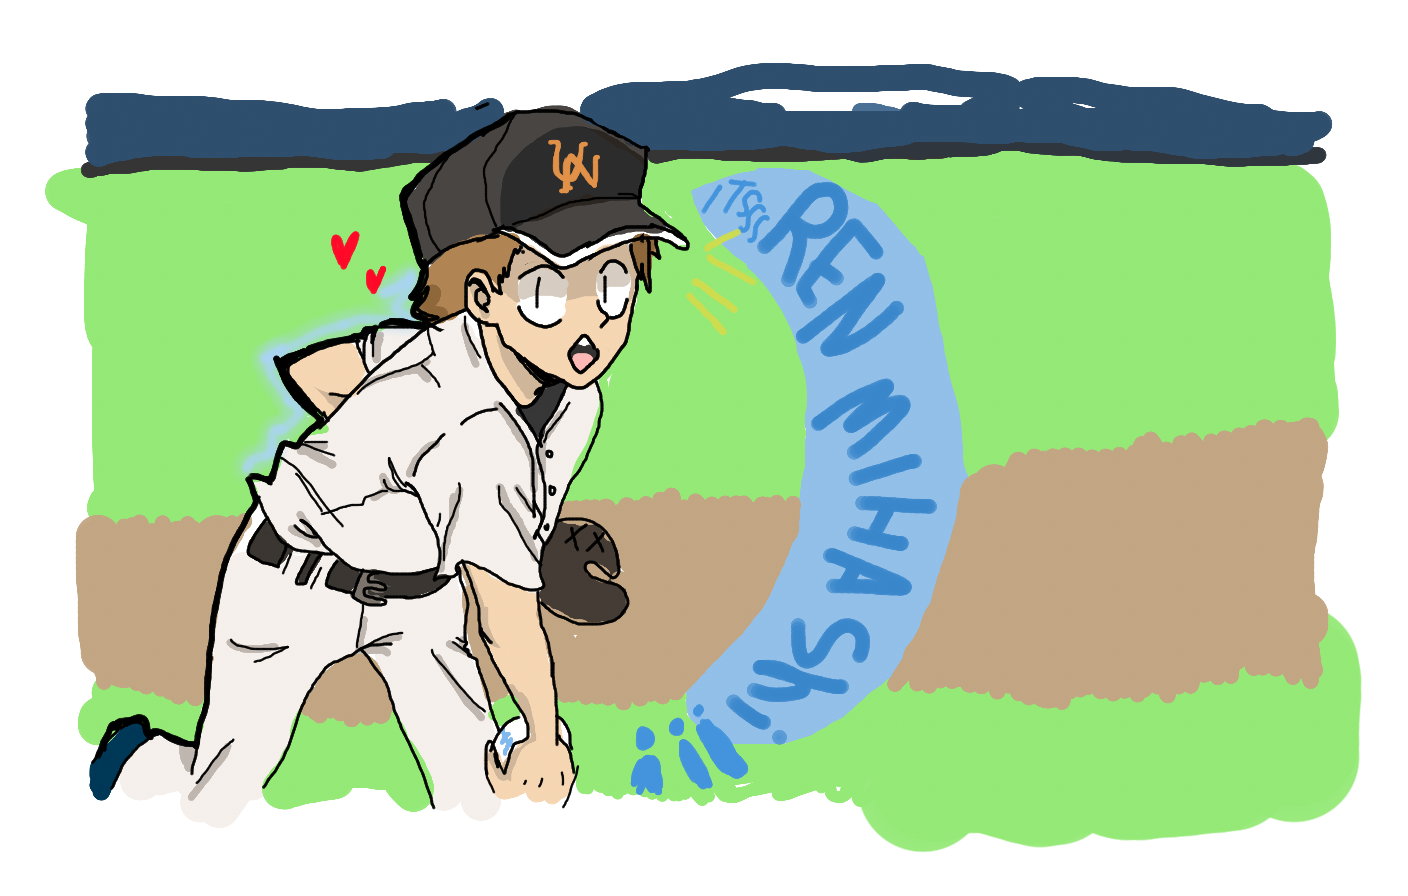 batter uppp by Gerardway2008